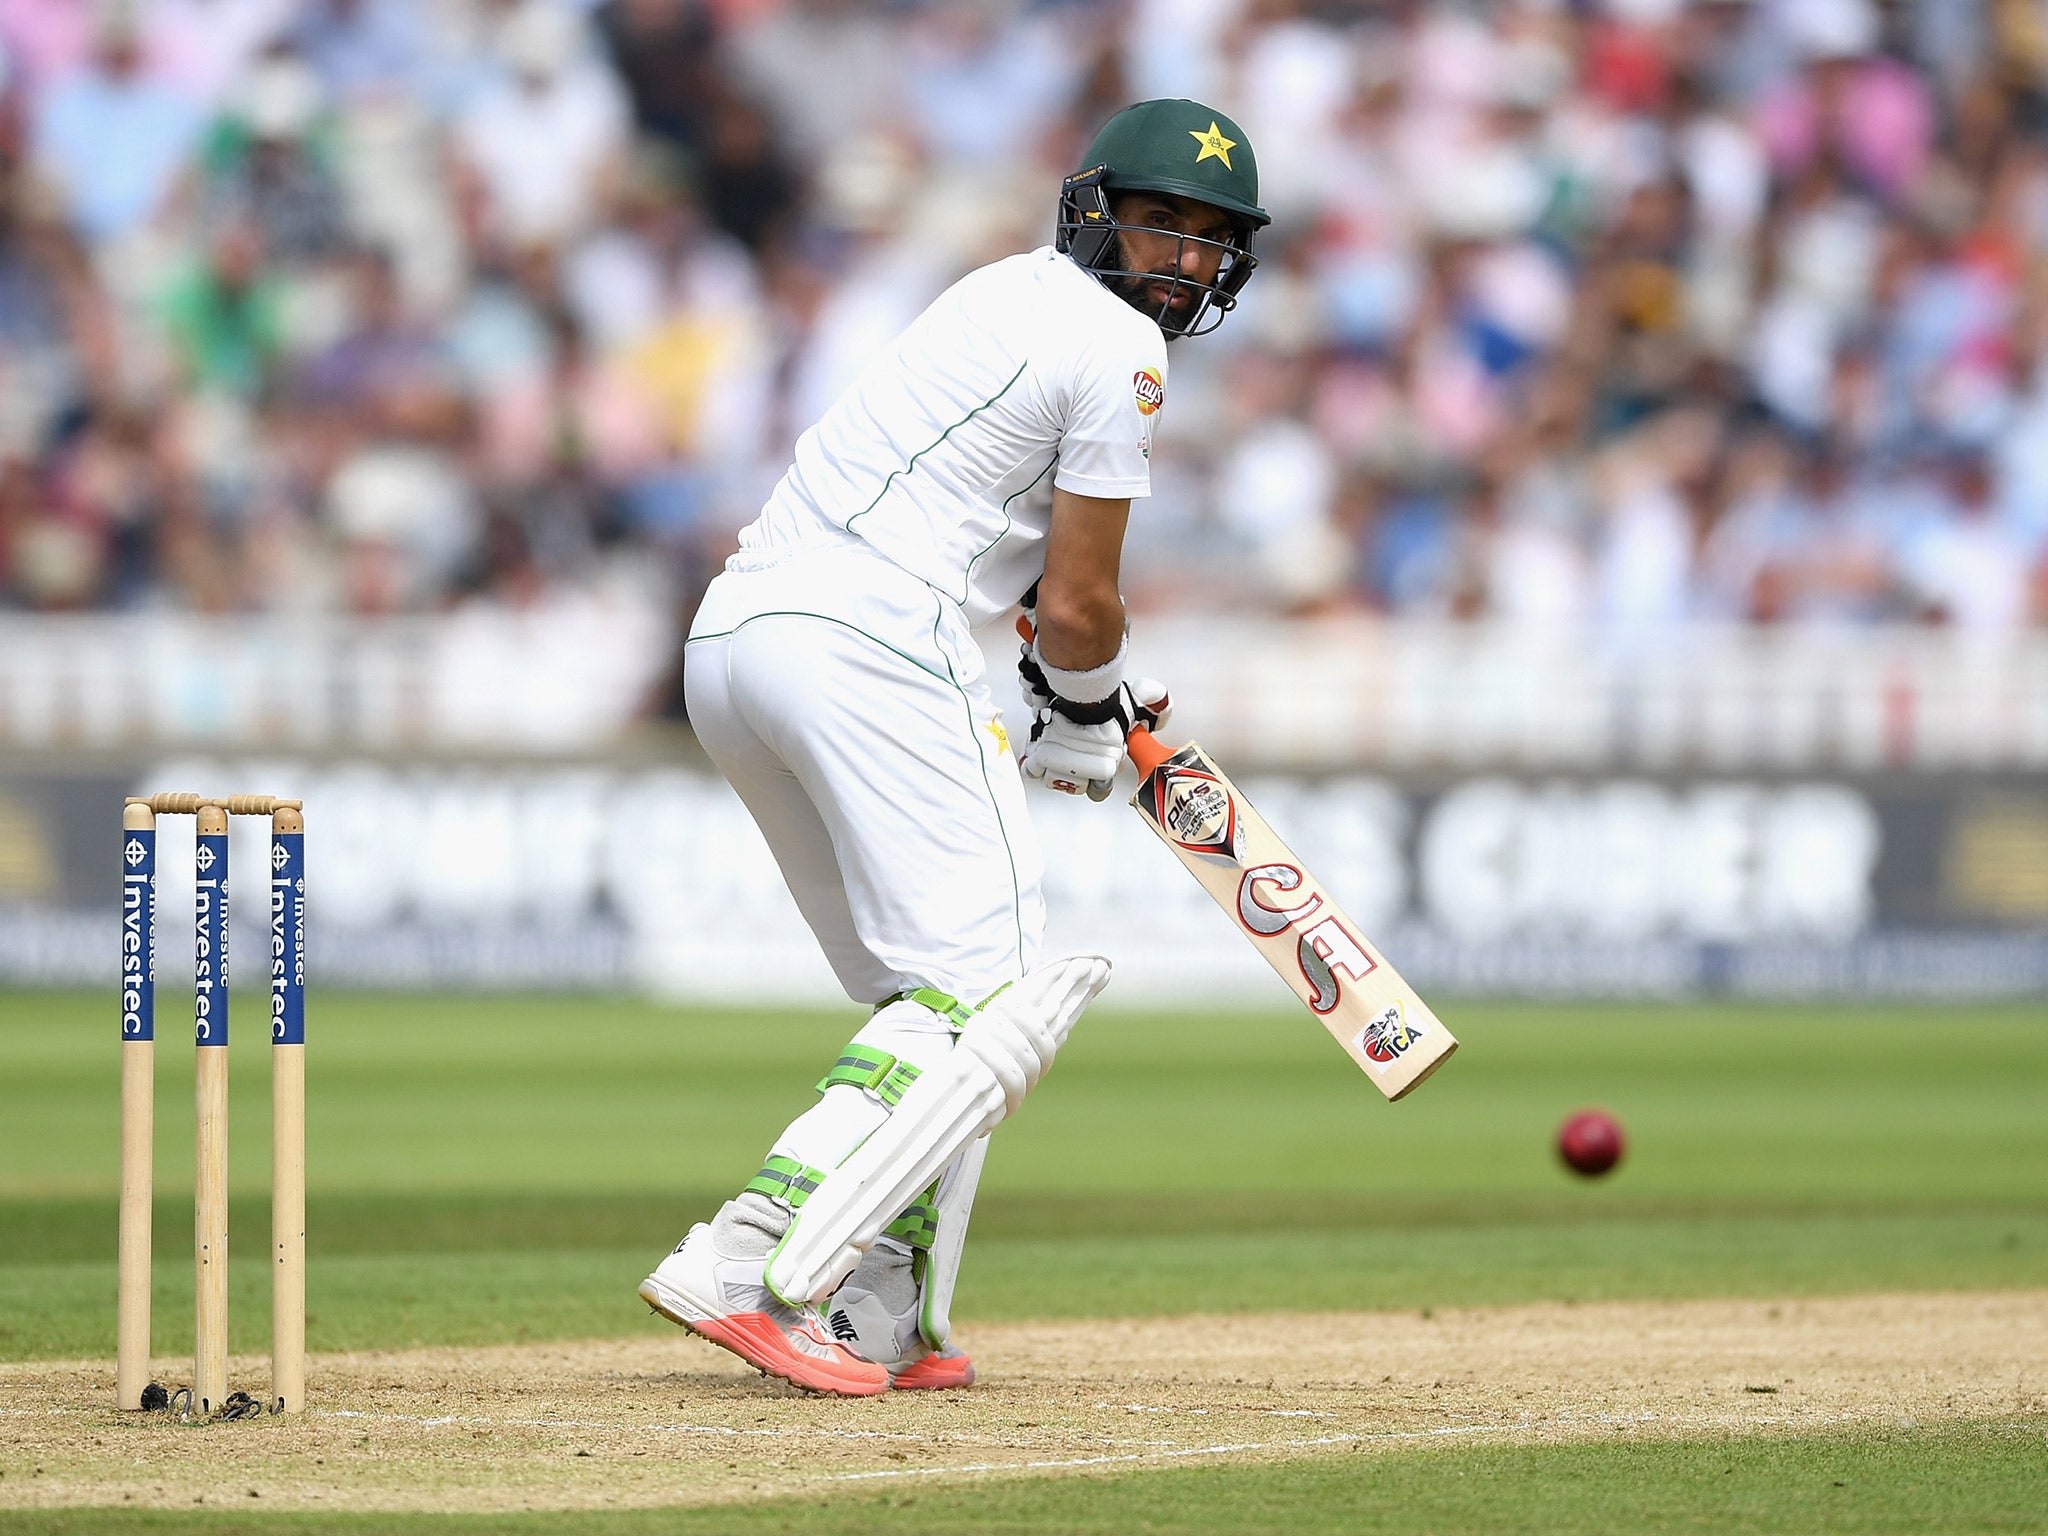 Misbah-ul-Haq reached lunch unbeaten on 44 as Pakistan started to build a first-innings lead over England